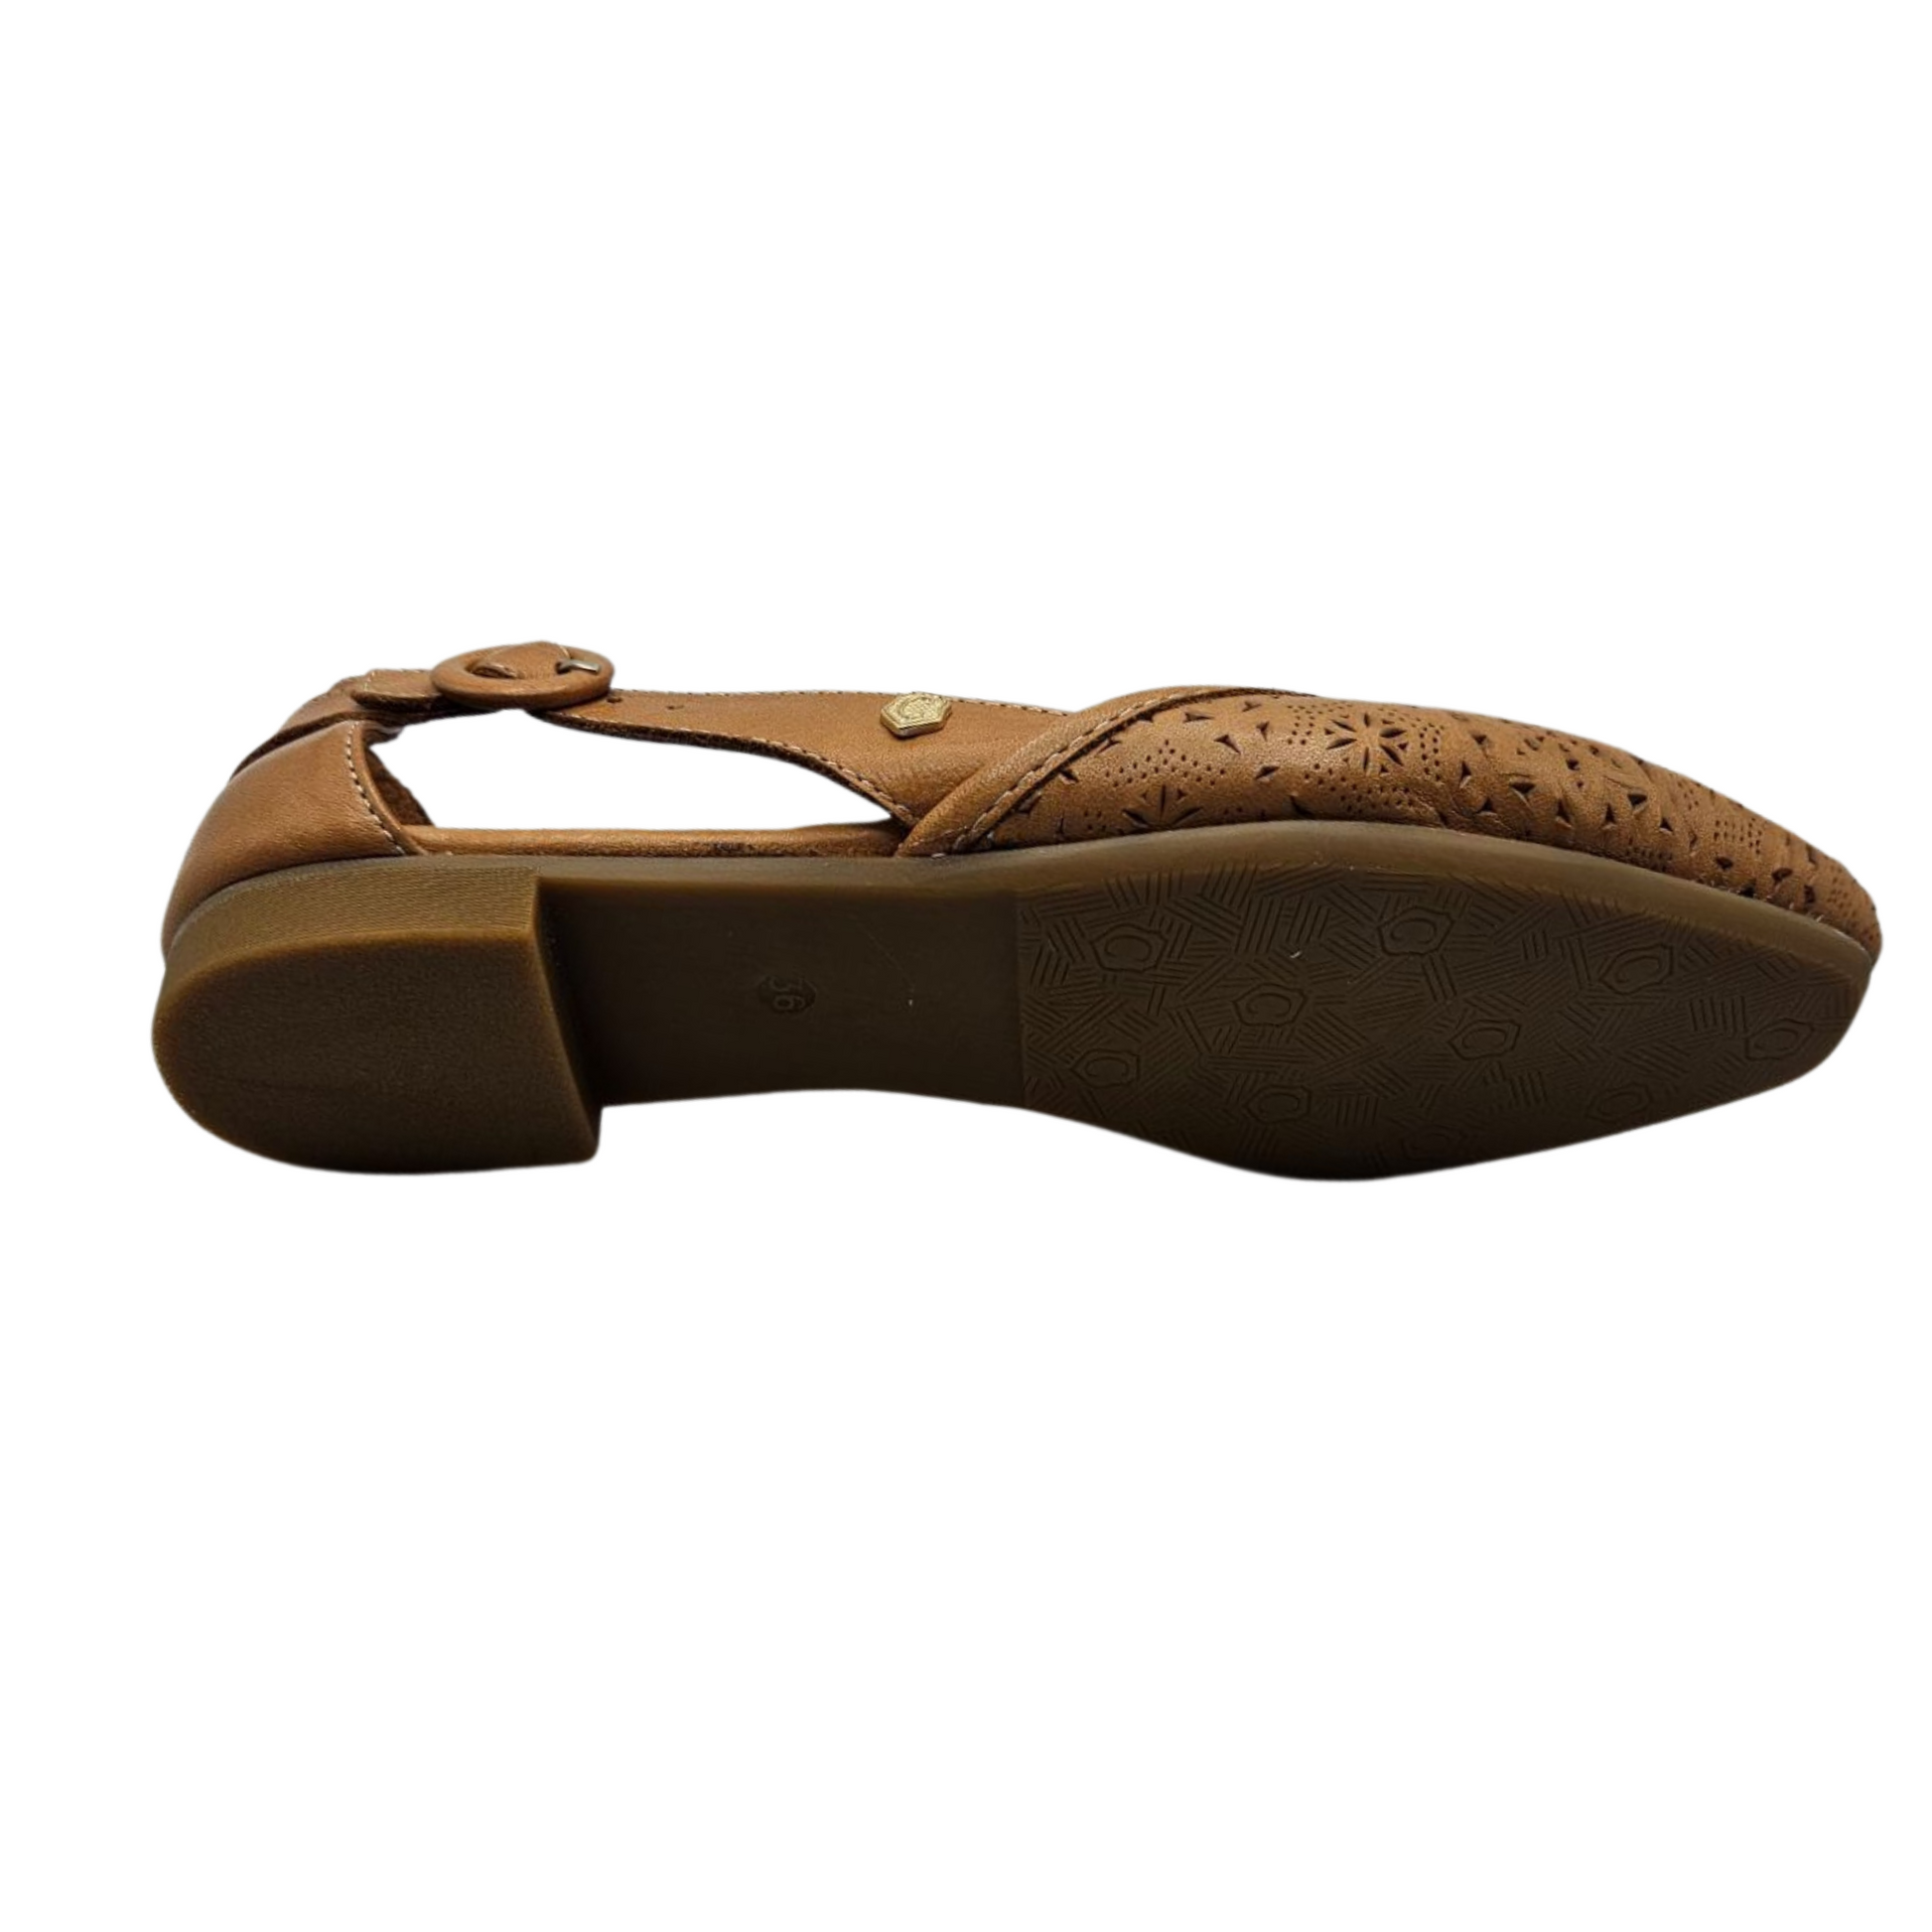 Bottom view of a tan perforated leather flat with a slightly pointed toe. Leather lined and has an adjustable side strap.